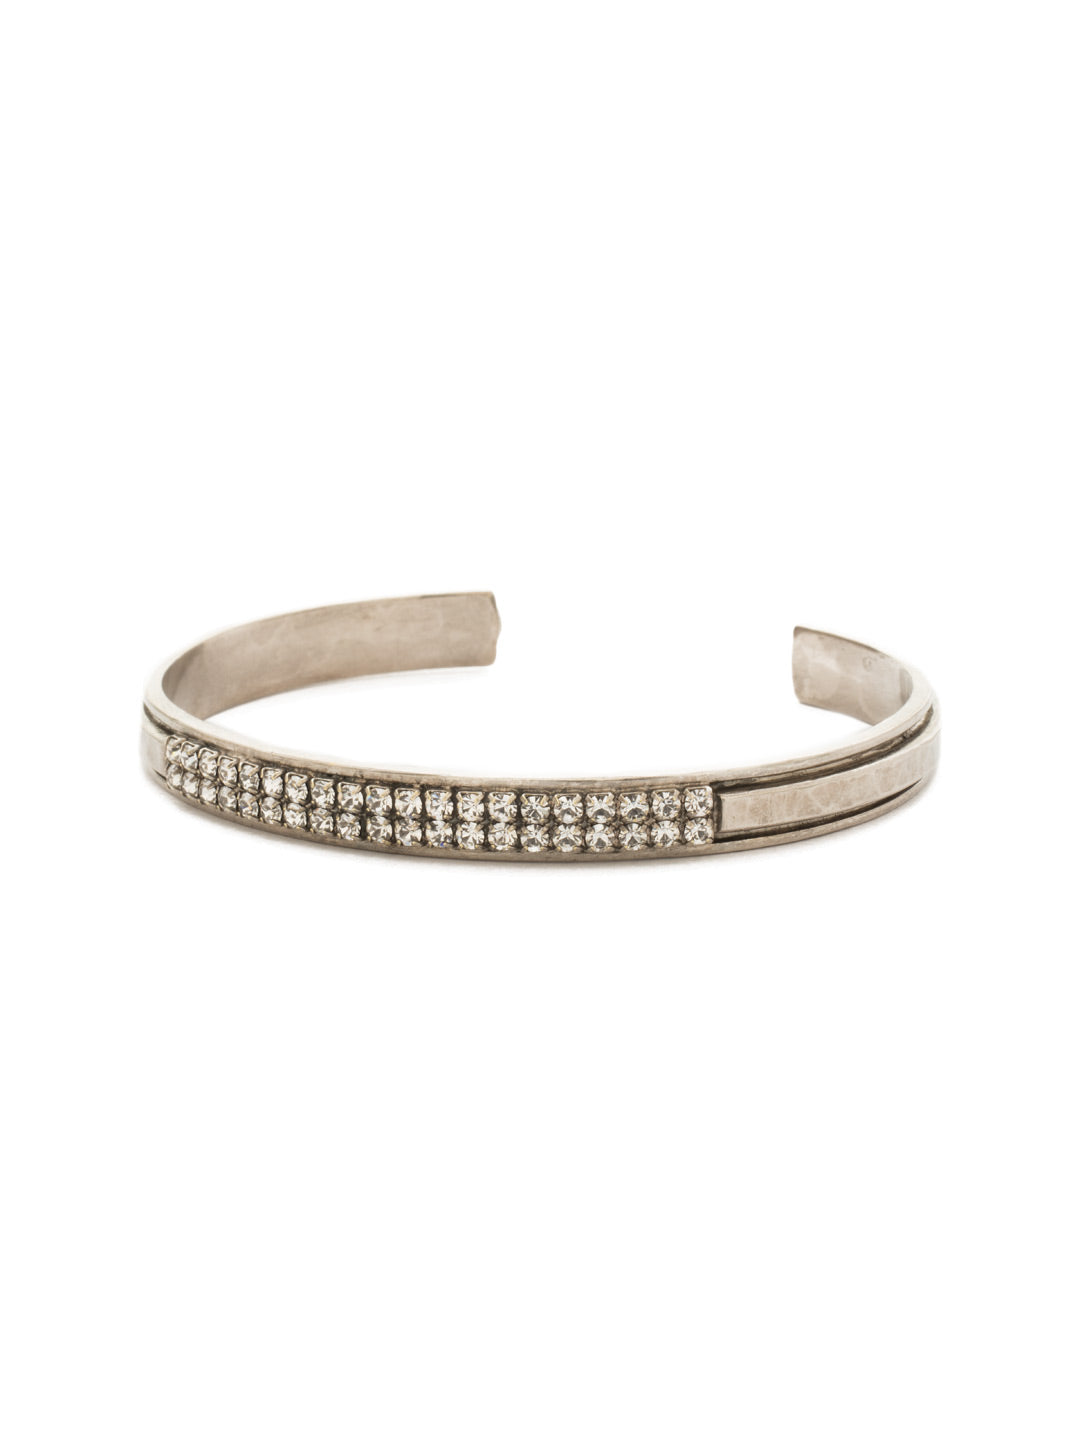 All Lined Up Cuff Bracelet - BDW22ASCRY - <p>Two lines of round crystals on a metal cuff creates this modern design From Sorrelli's Crystal collection in our Antique Silver-tone finish.</p>